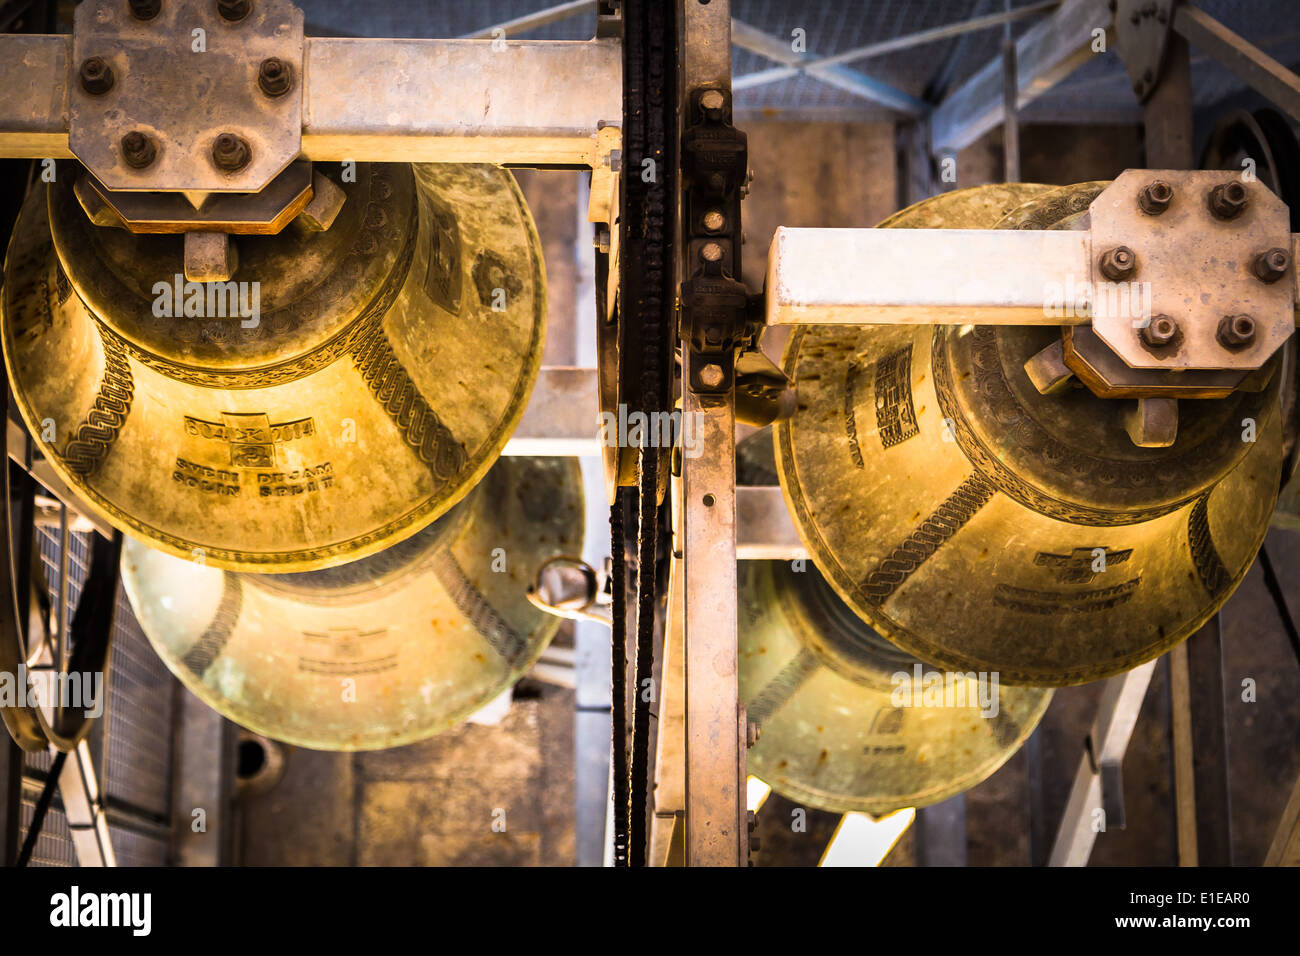 Bells located in the cathedral of St Domnius in Split Croatia showing inscription and seen from above Stock Photo